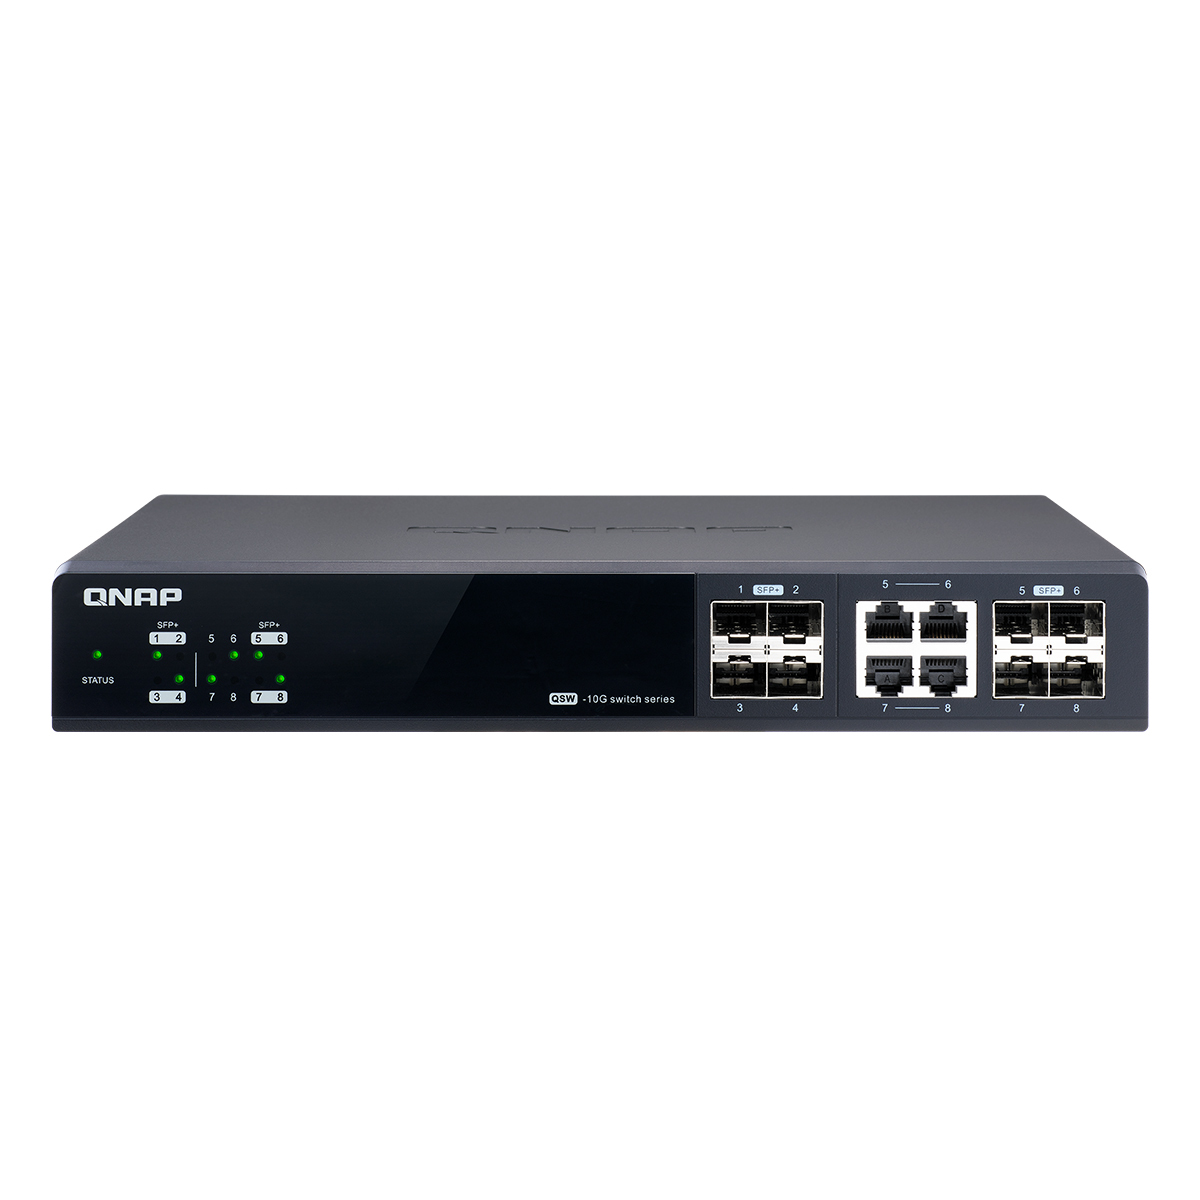 QNAP Systems QSW-M804-4C 8-Port 10GbE Managed Switch von QNAP